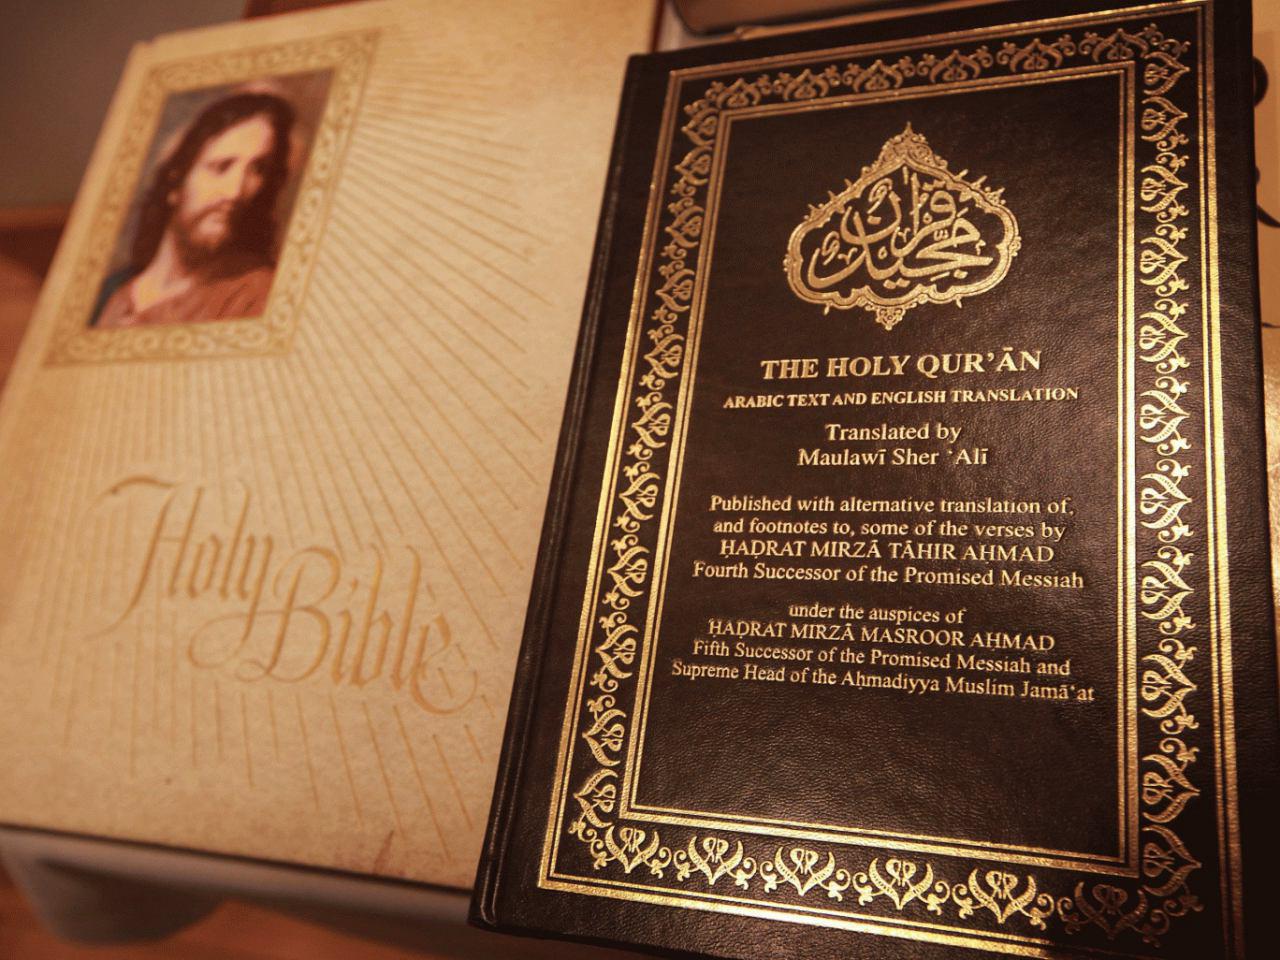 Photo of “Jesus in Quran and Bible” Exhibition in Greece